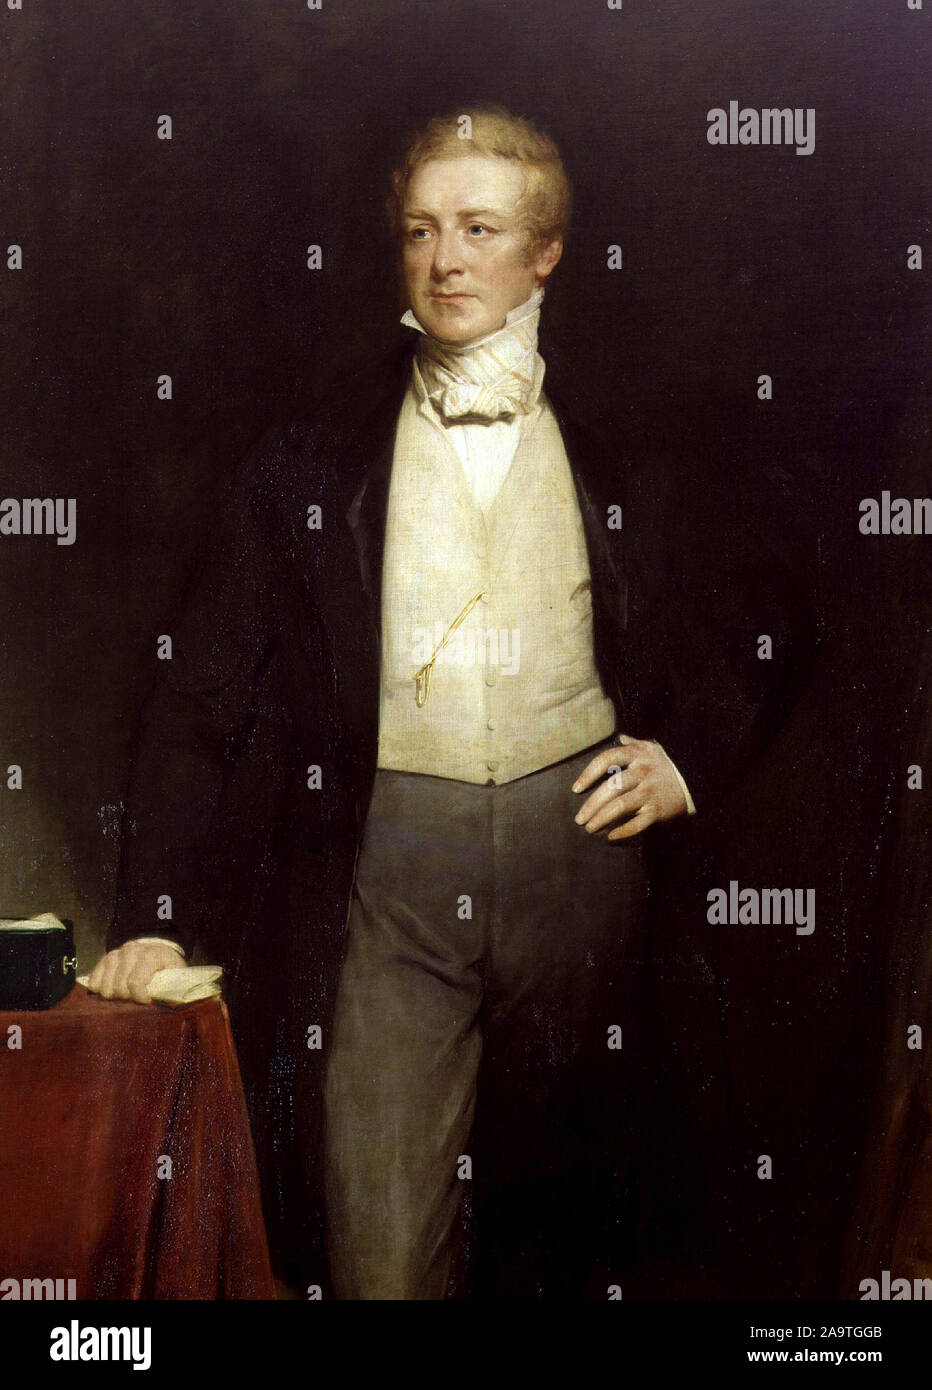 Sir Robert Peel by Henry William Pickersgill, (1788 – 1850) British Conservative statesman who served twice as Prime Minister of the United Kingdom (1834–35 and 1841–46) and twice as Home Secretary (1822–27 and 1828–30). He is the father of modern British policing, founder of the Metropolitan Police Service. Stock Photo